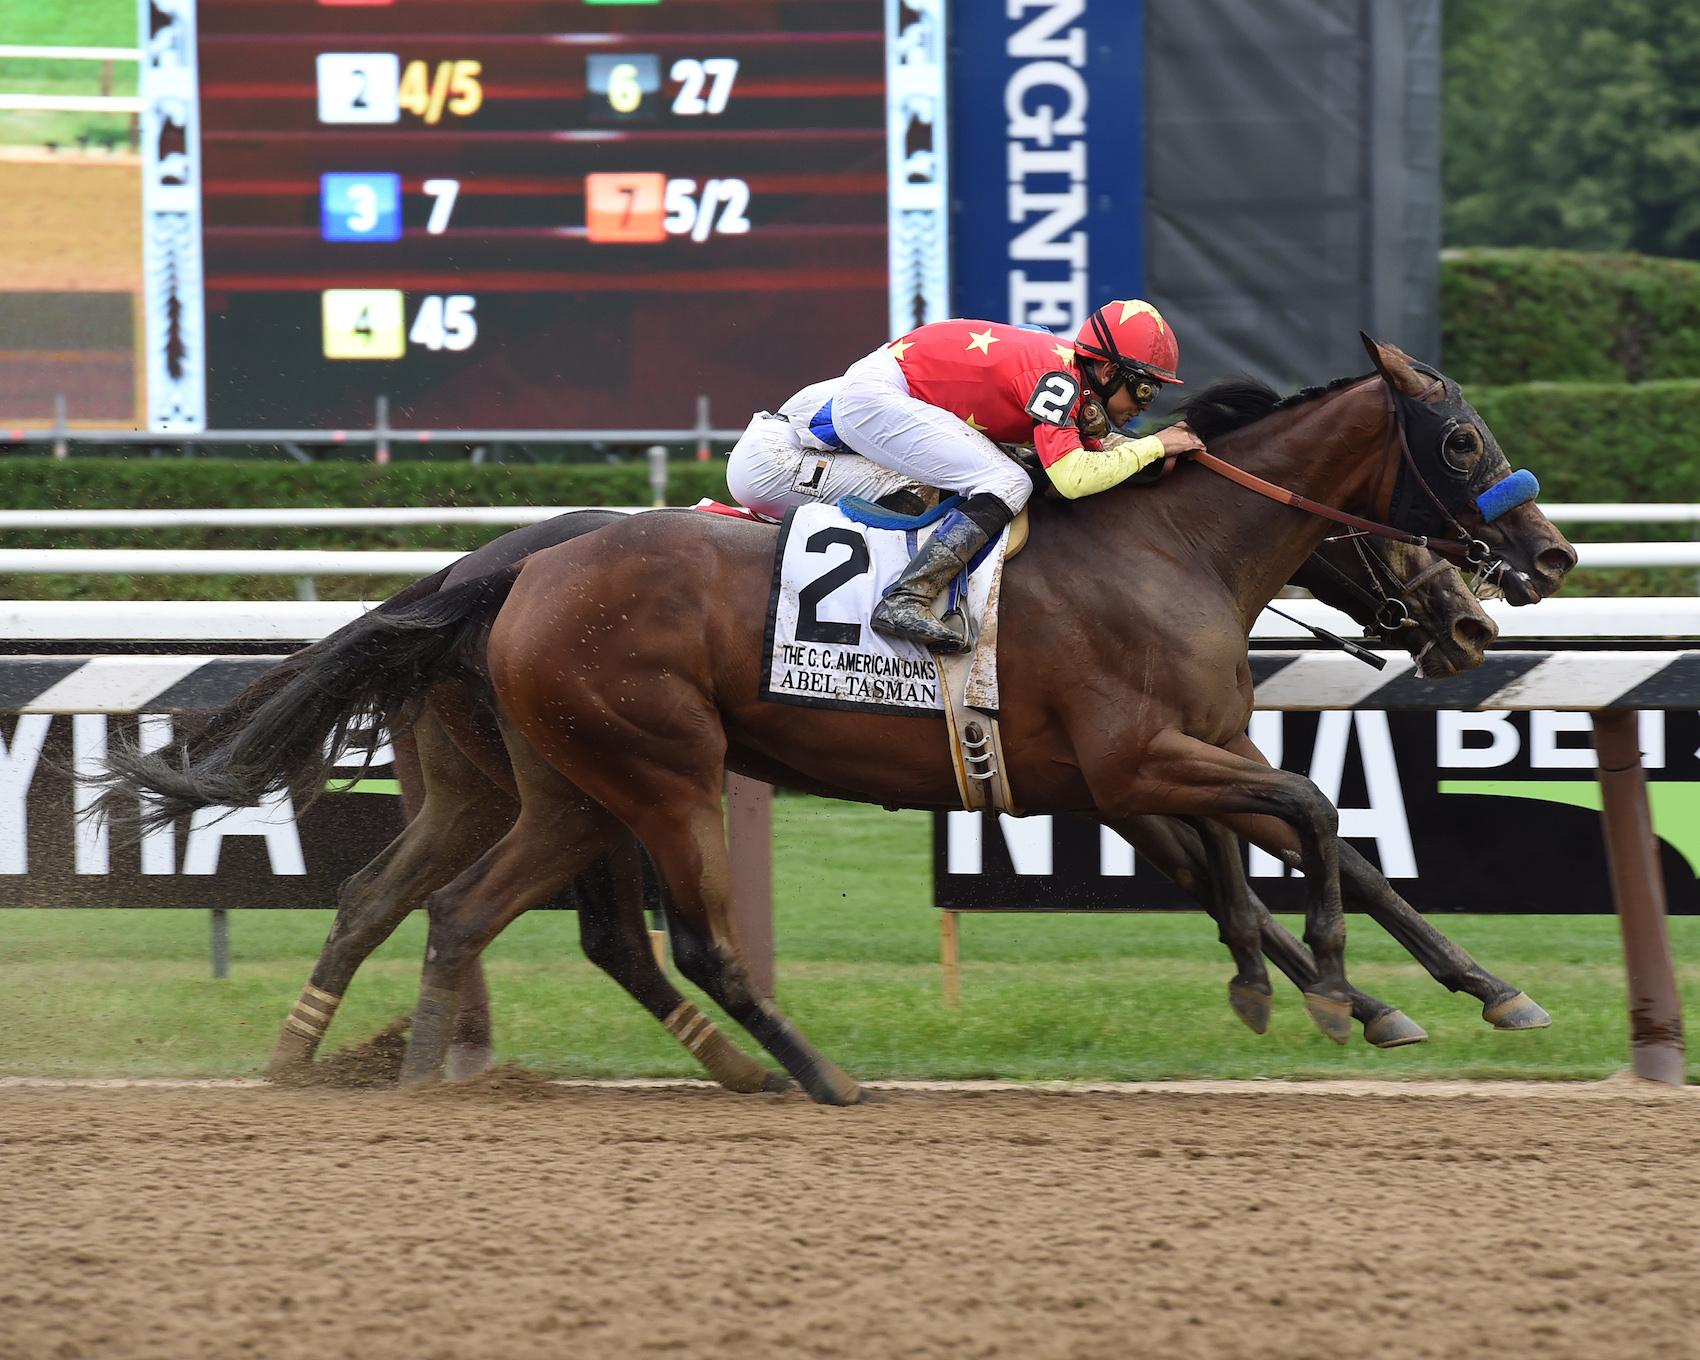 Abel Tasman wins the Coaching Club American Oaks at Saratoga in July by a head from Elate. Photo: NYRA.com